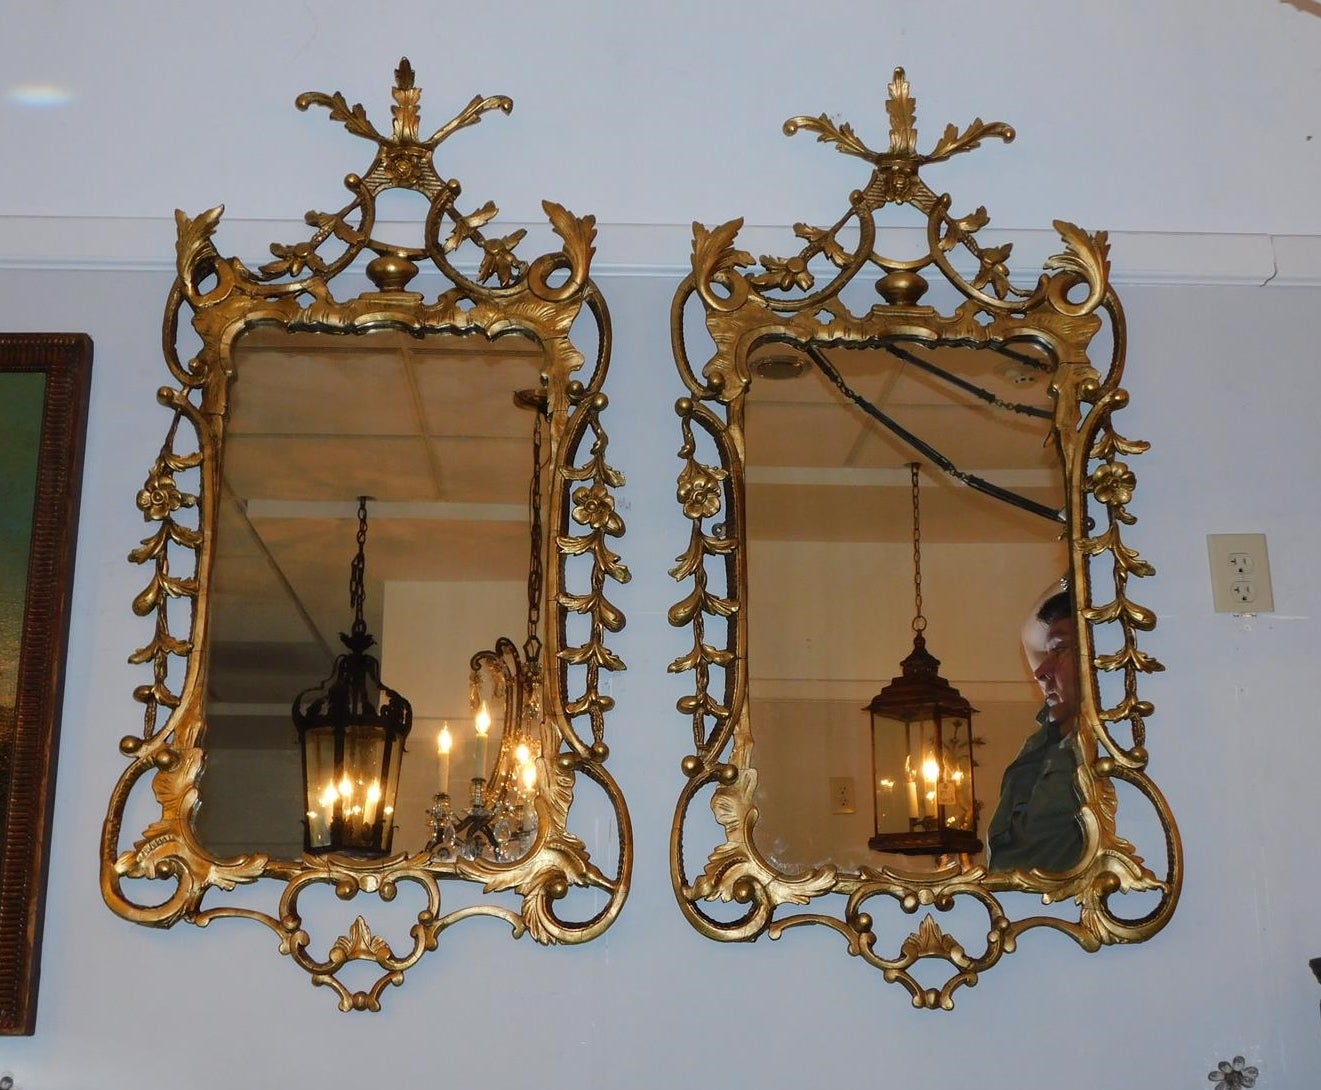 Pair of English Chippendale Gilt Wood Foliage and Scrolled Wall Mirrors. C. 1770